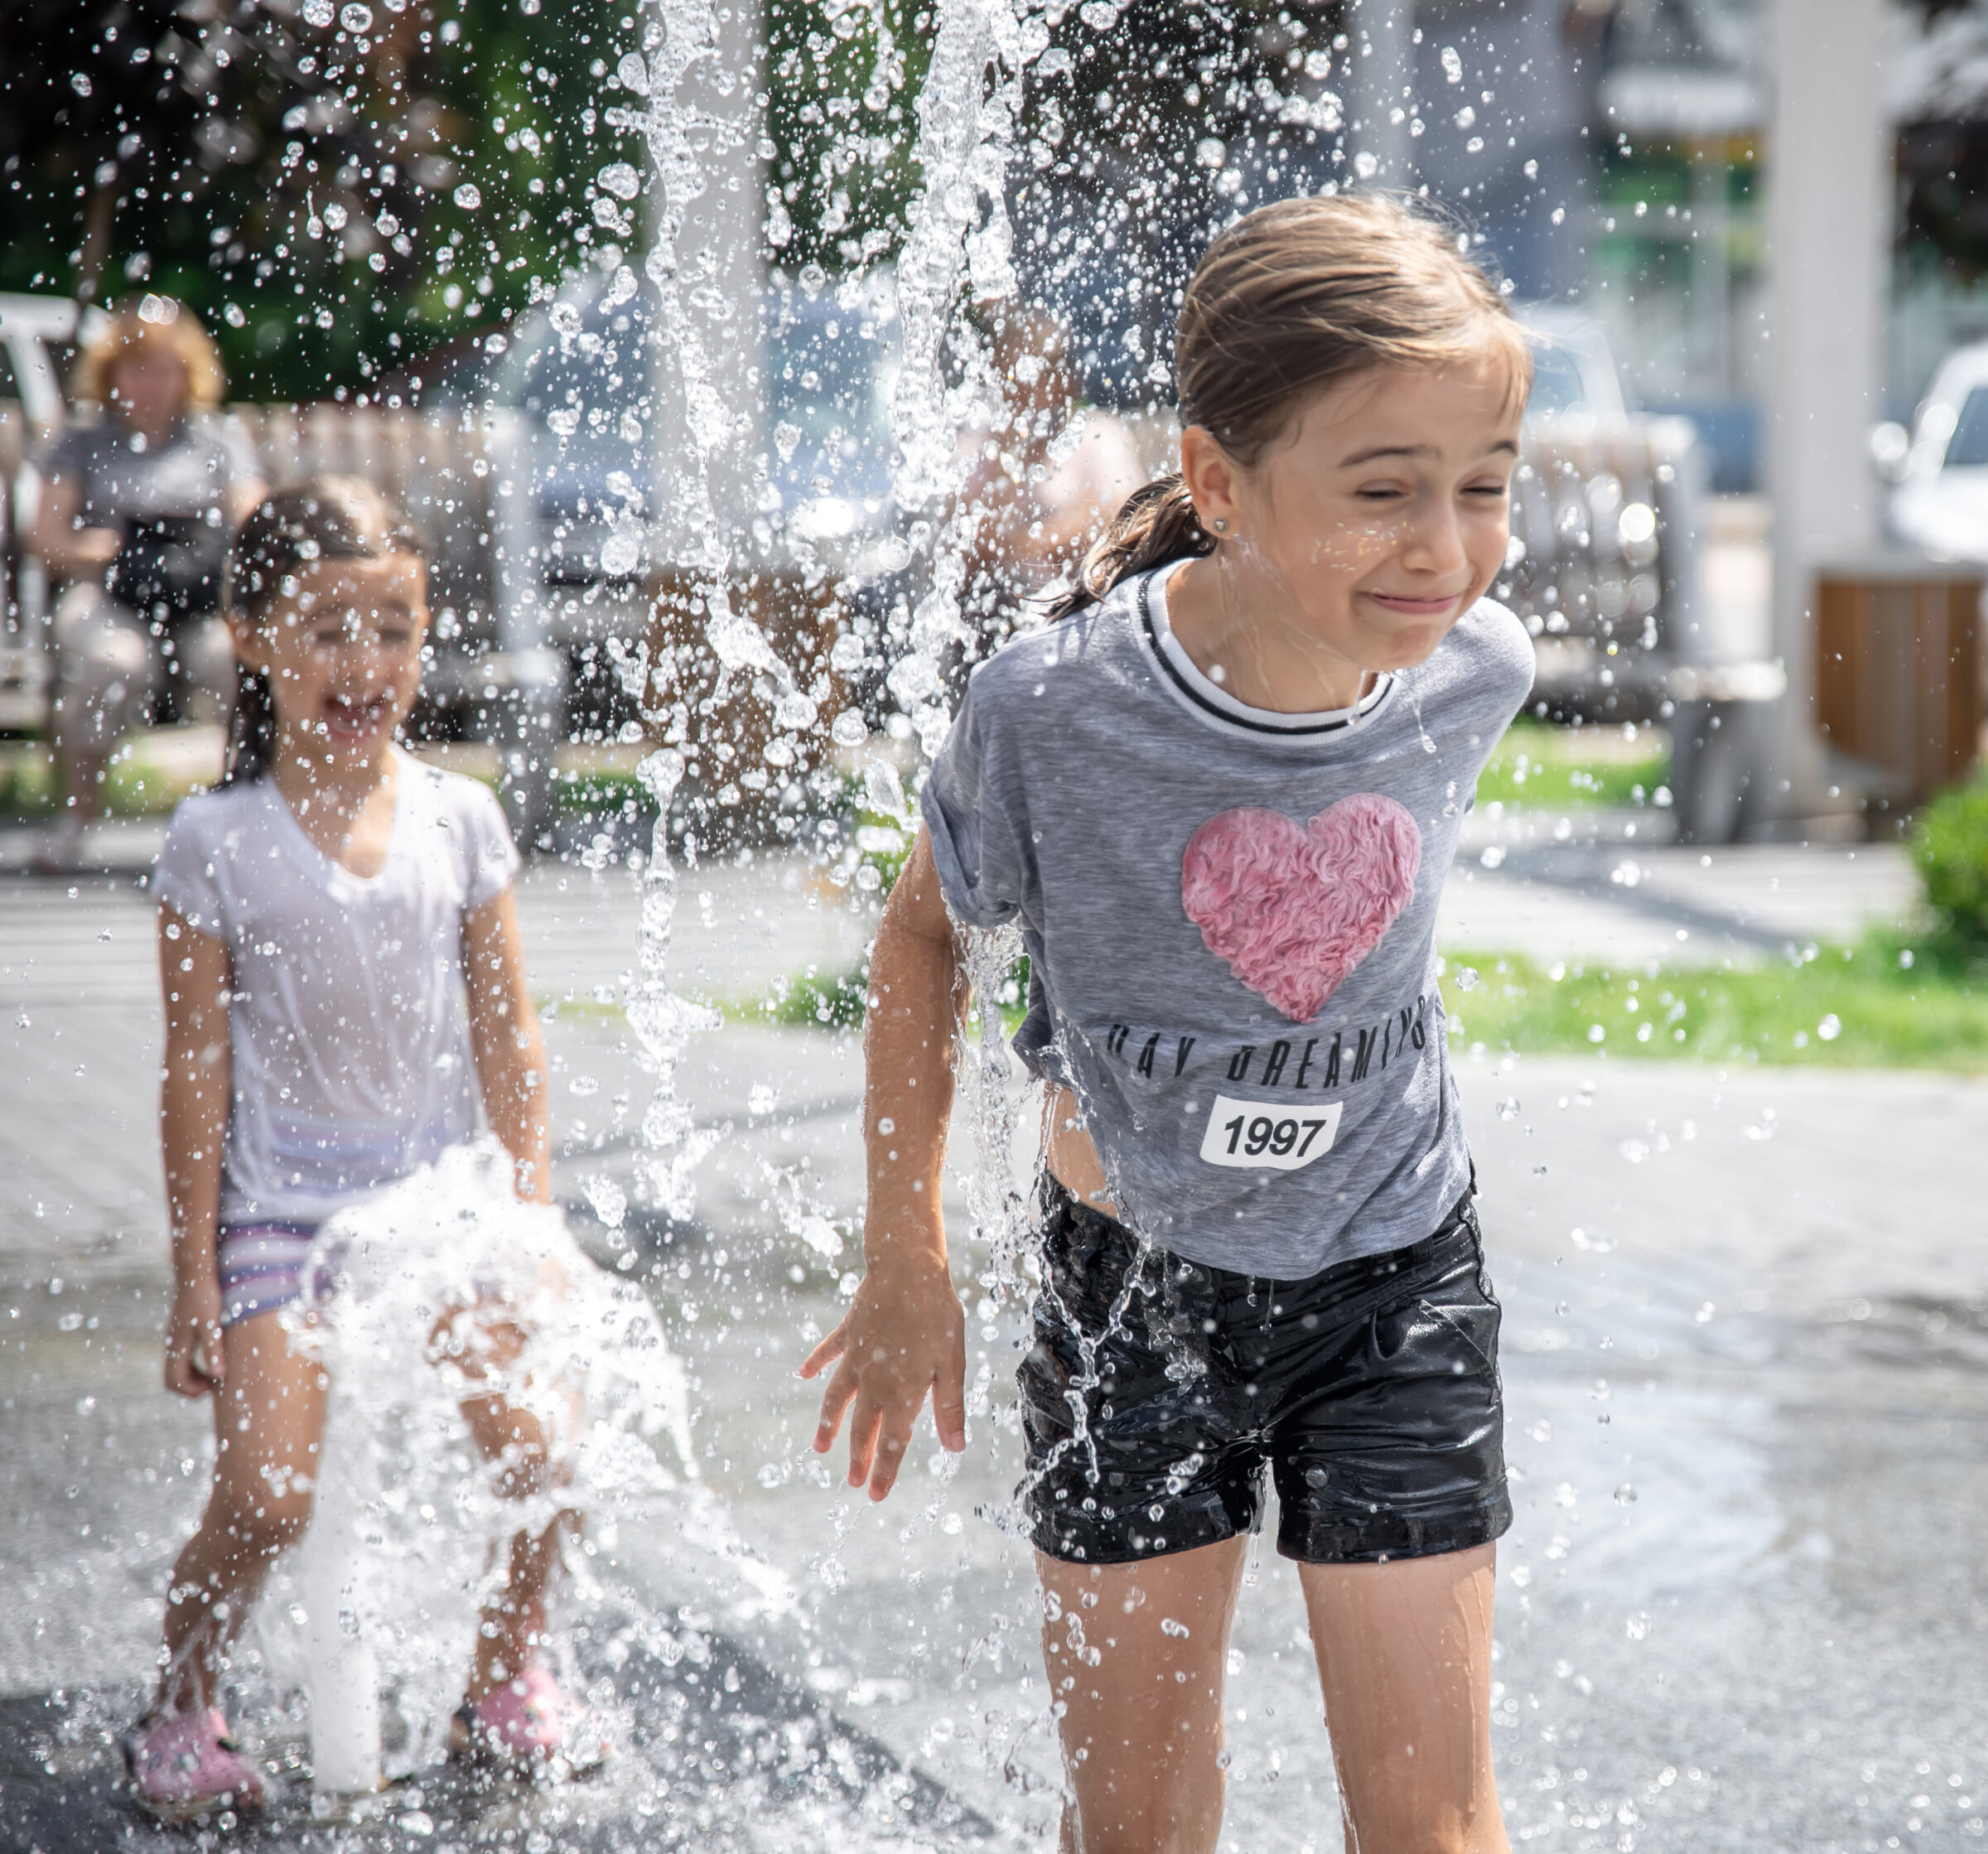 Little girls cool off in a fountain on a hot summer day.